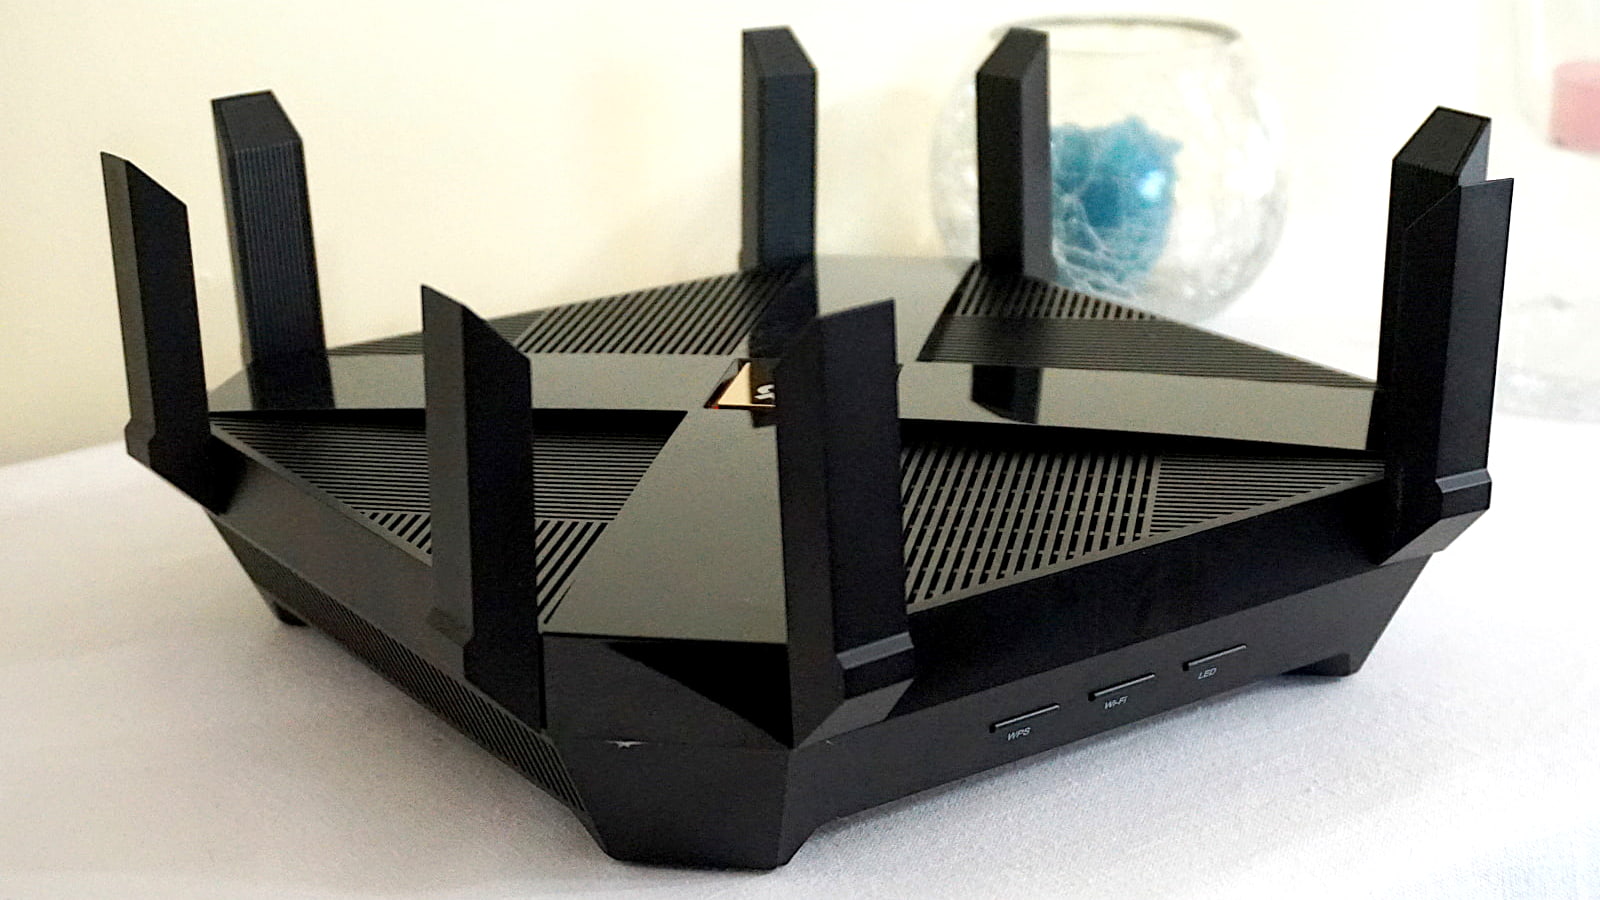 Best Routers for Xfinity